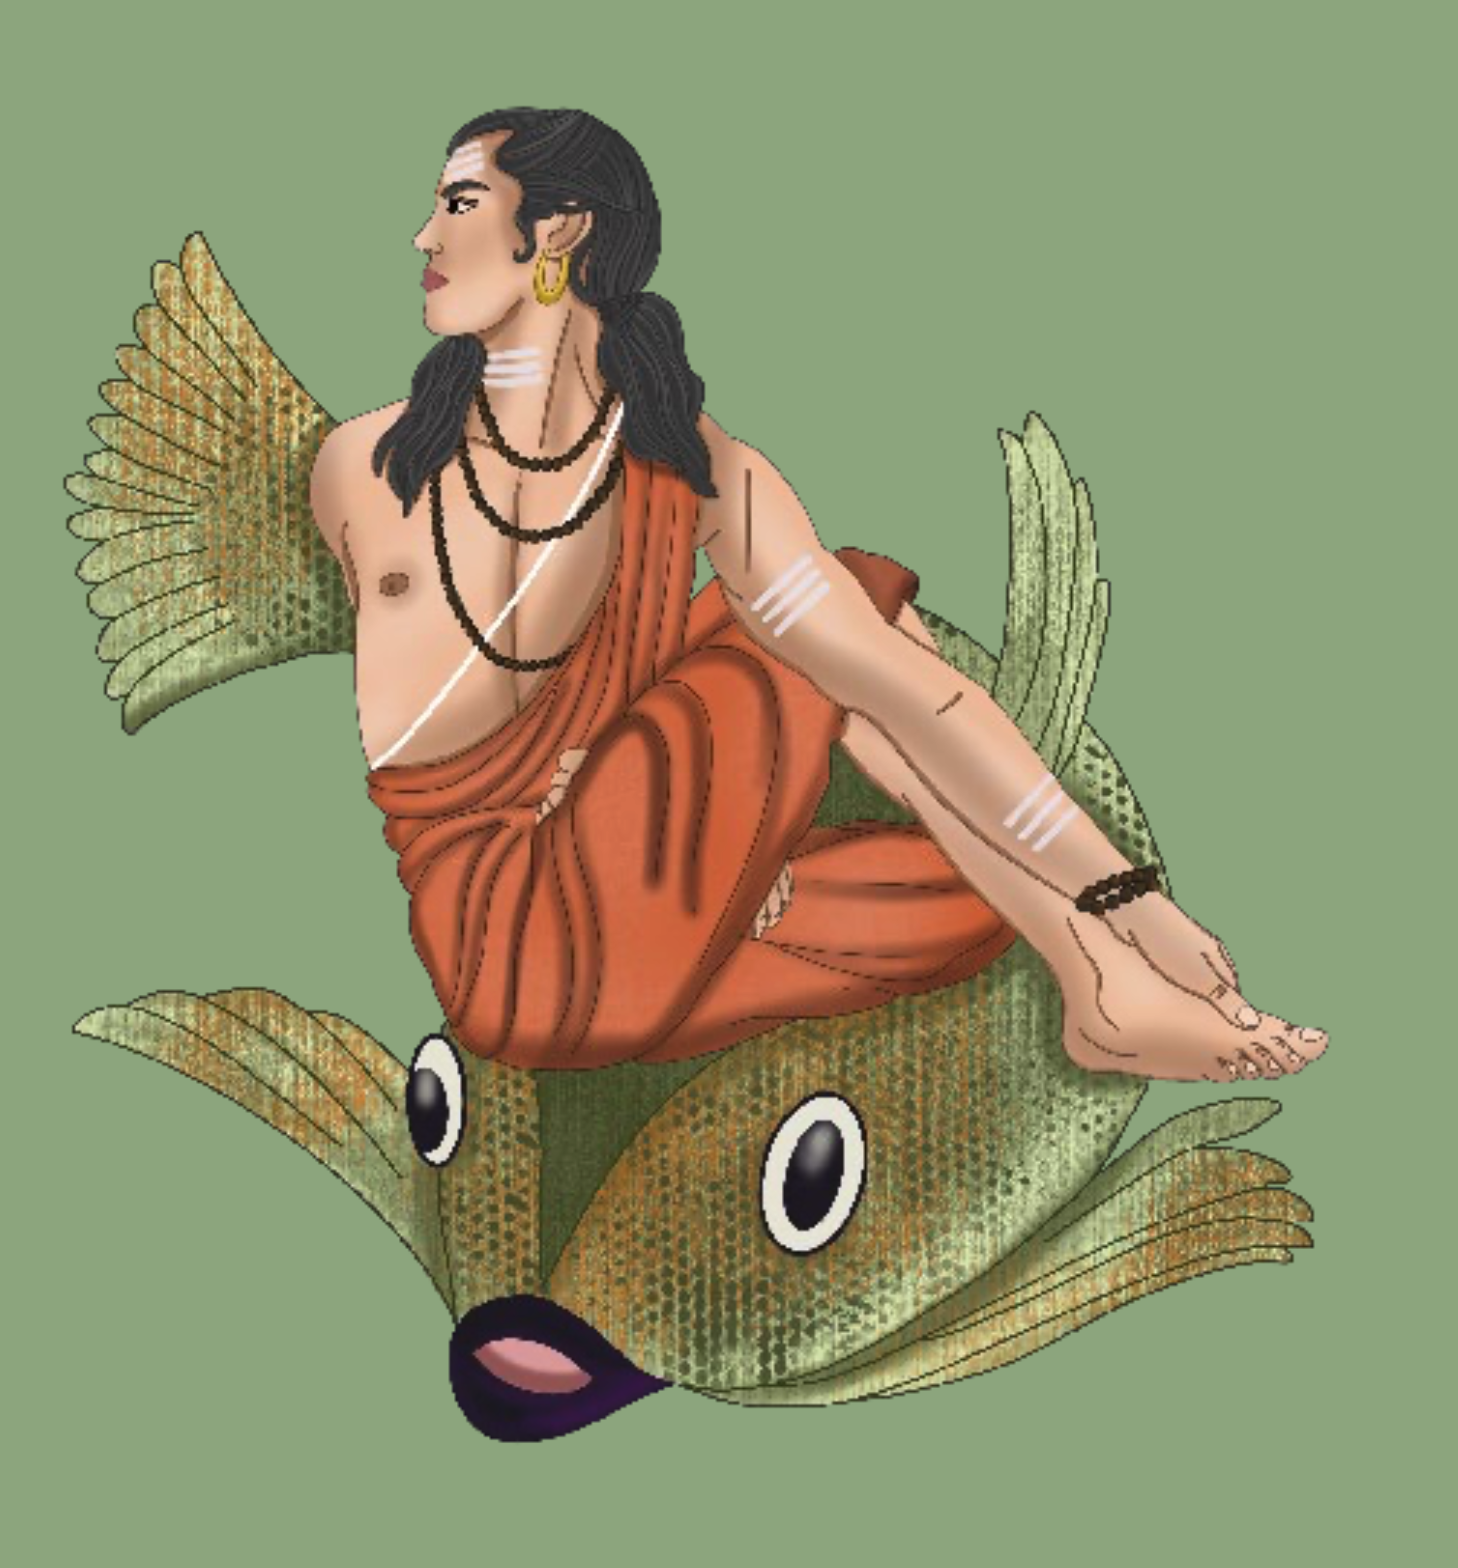 Image of Sage Matsyendra seated on a fish in a twist pose.